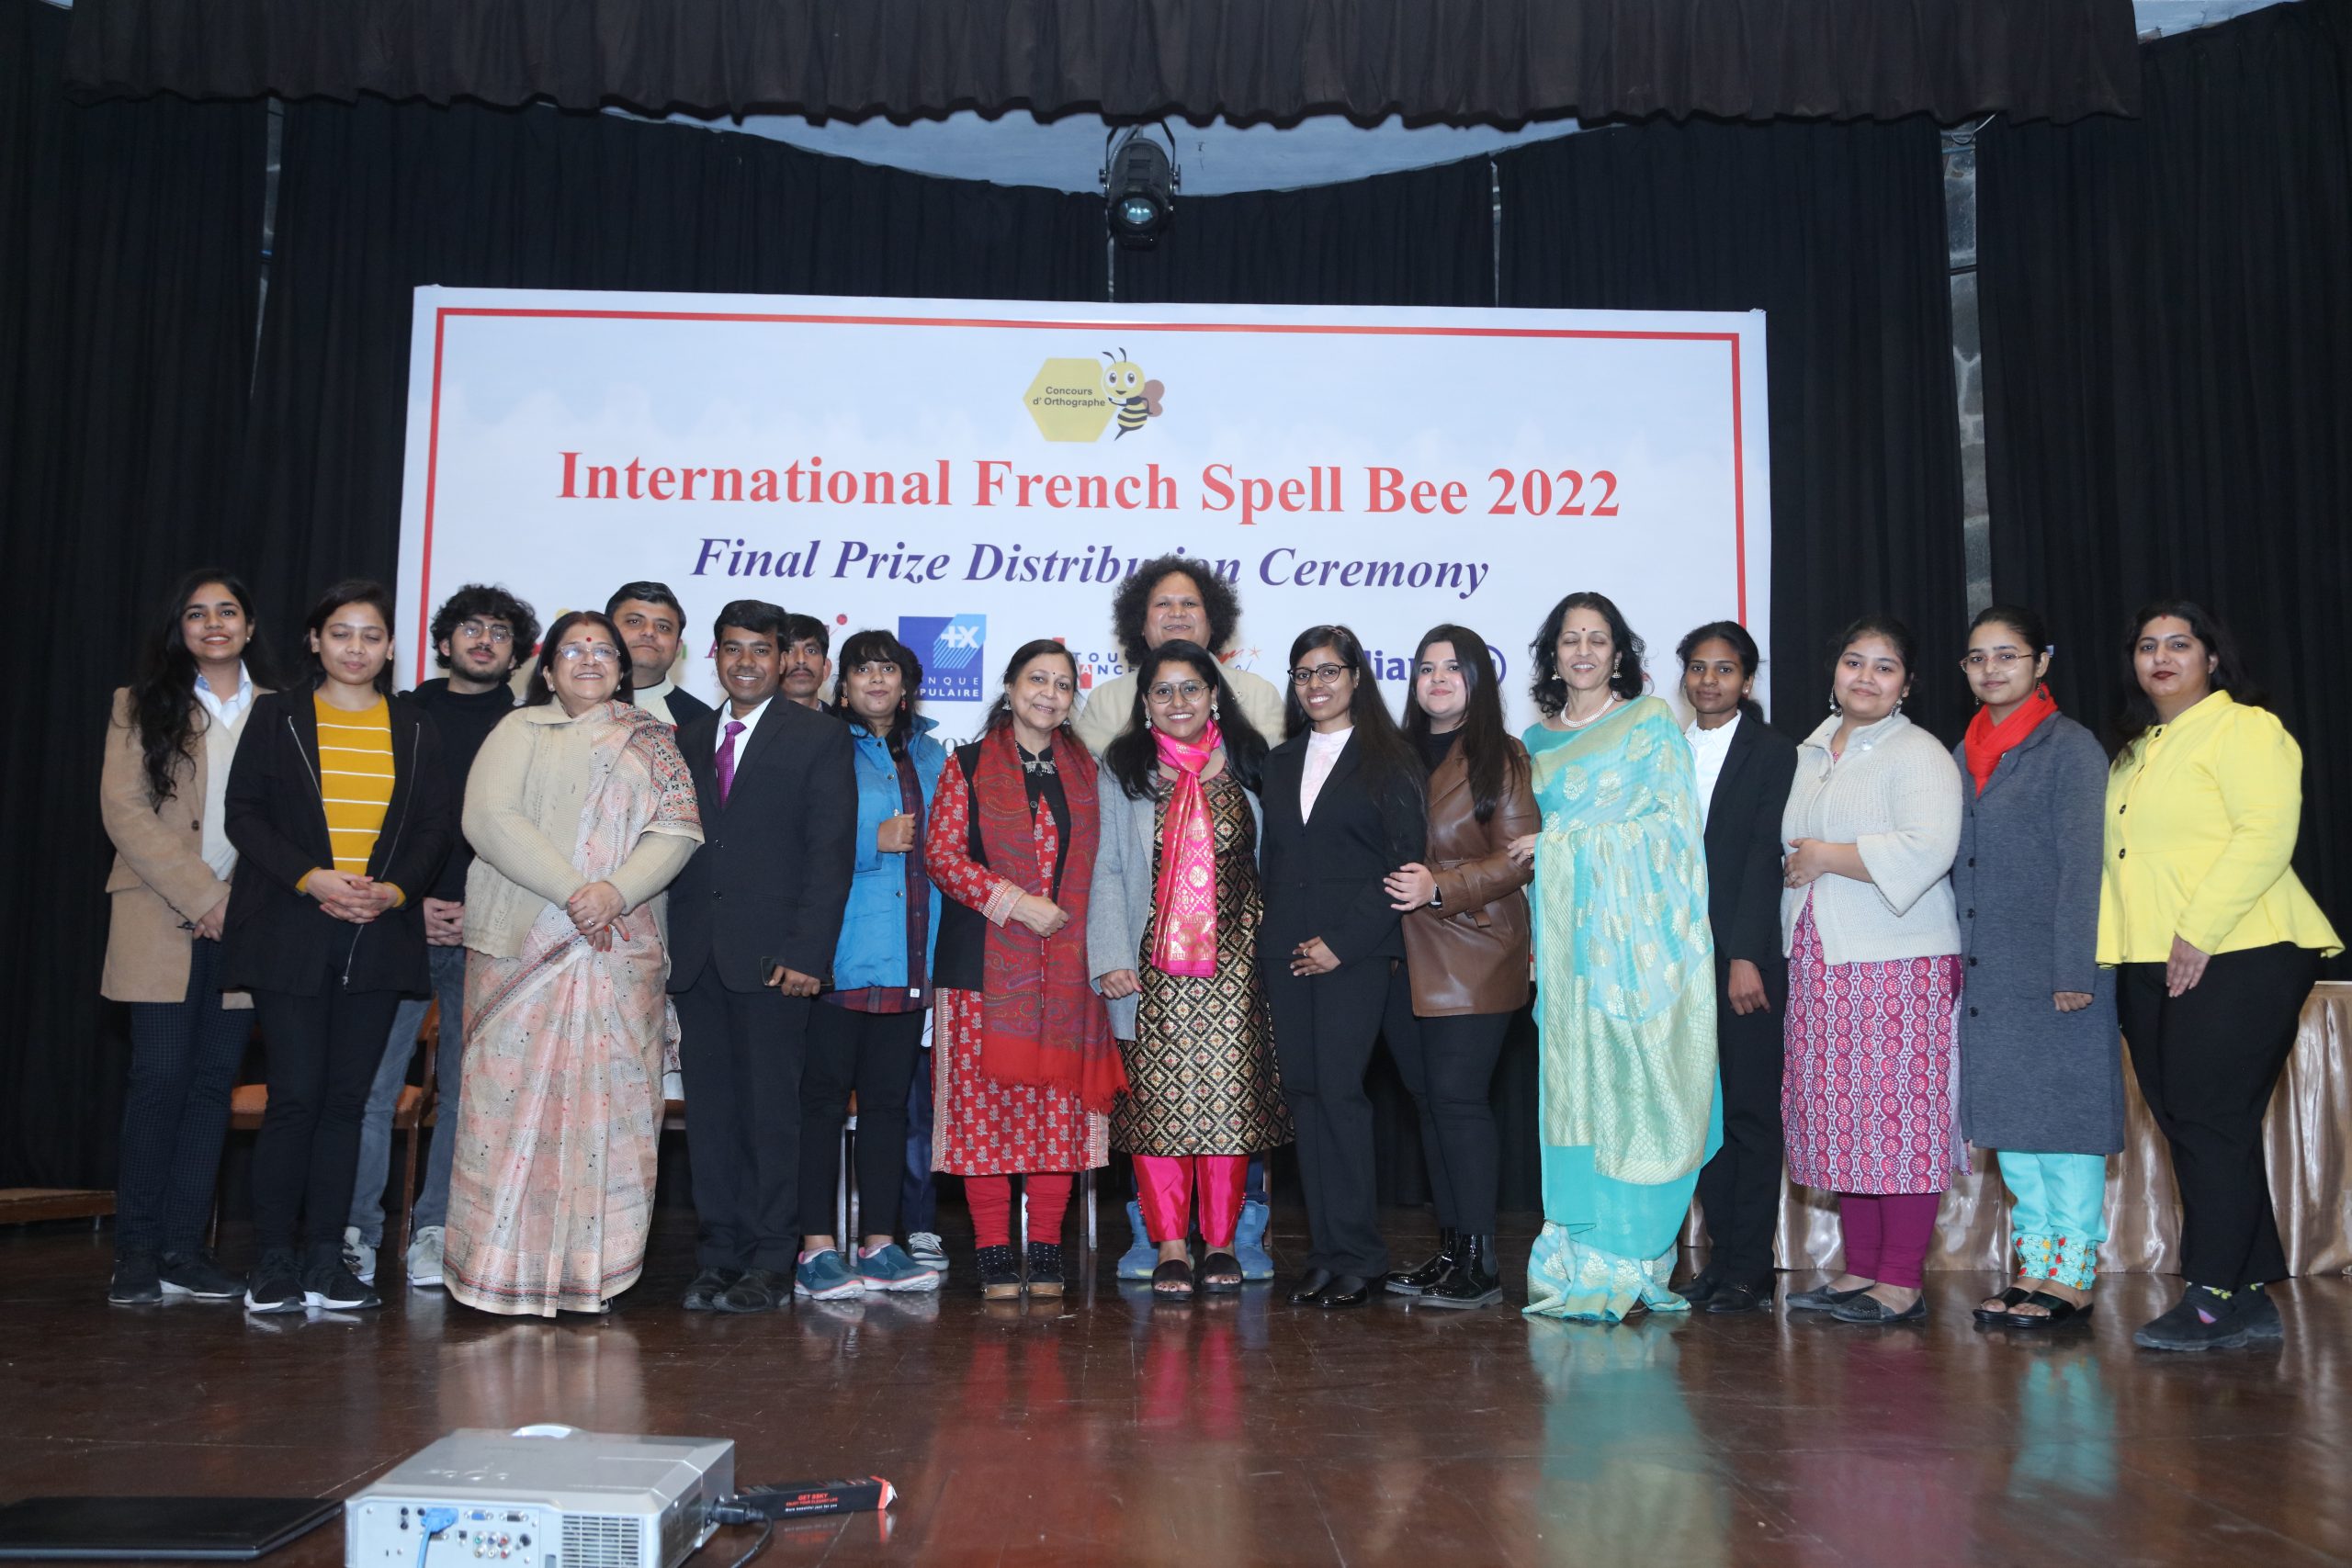 closing ceremony of international french spell bee